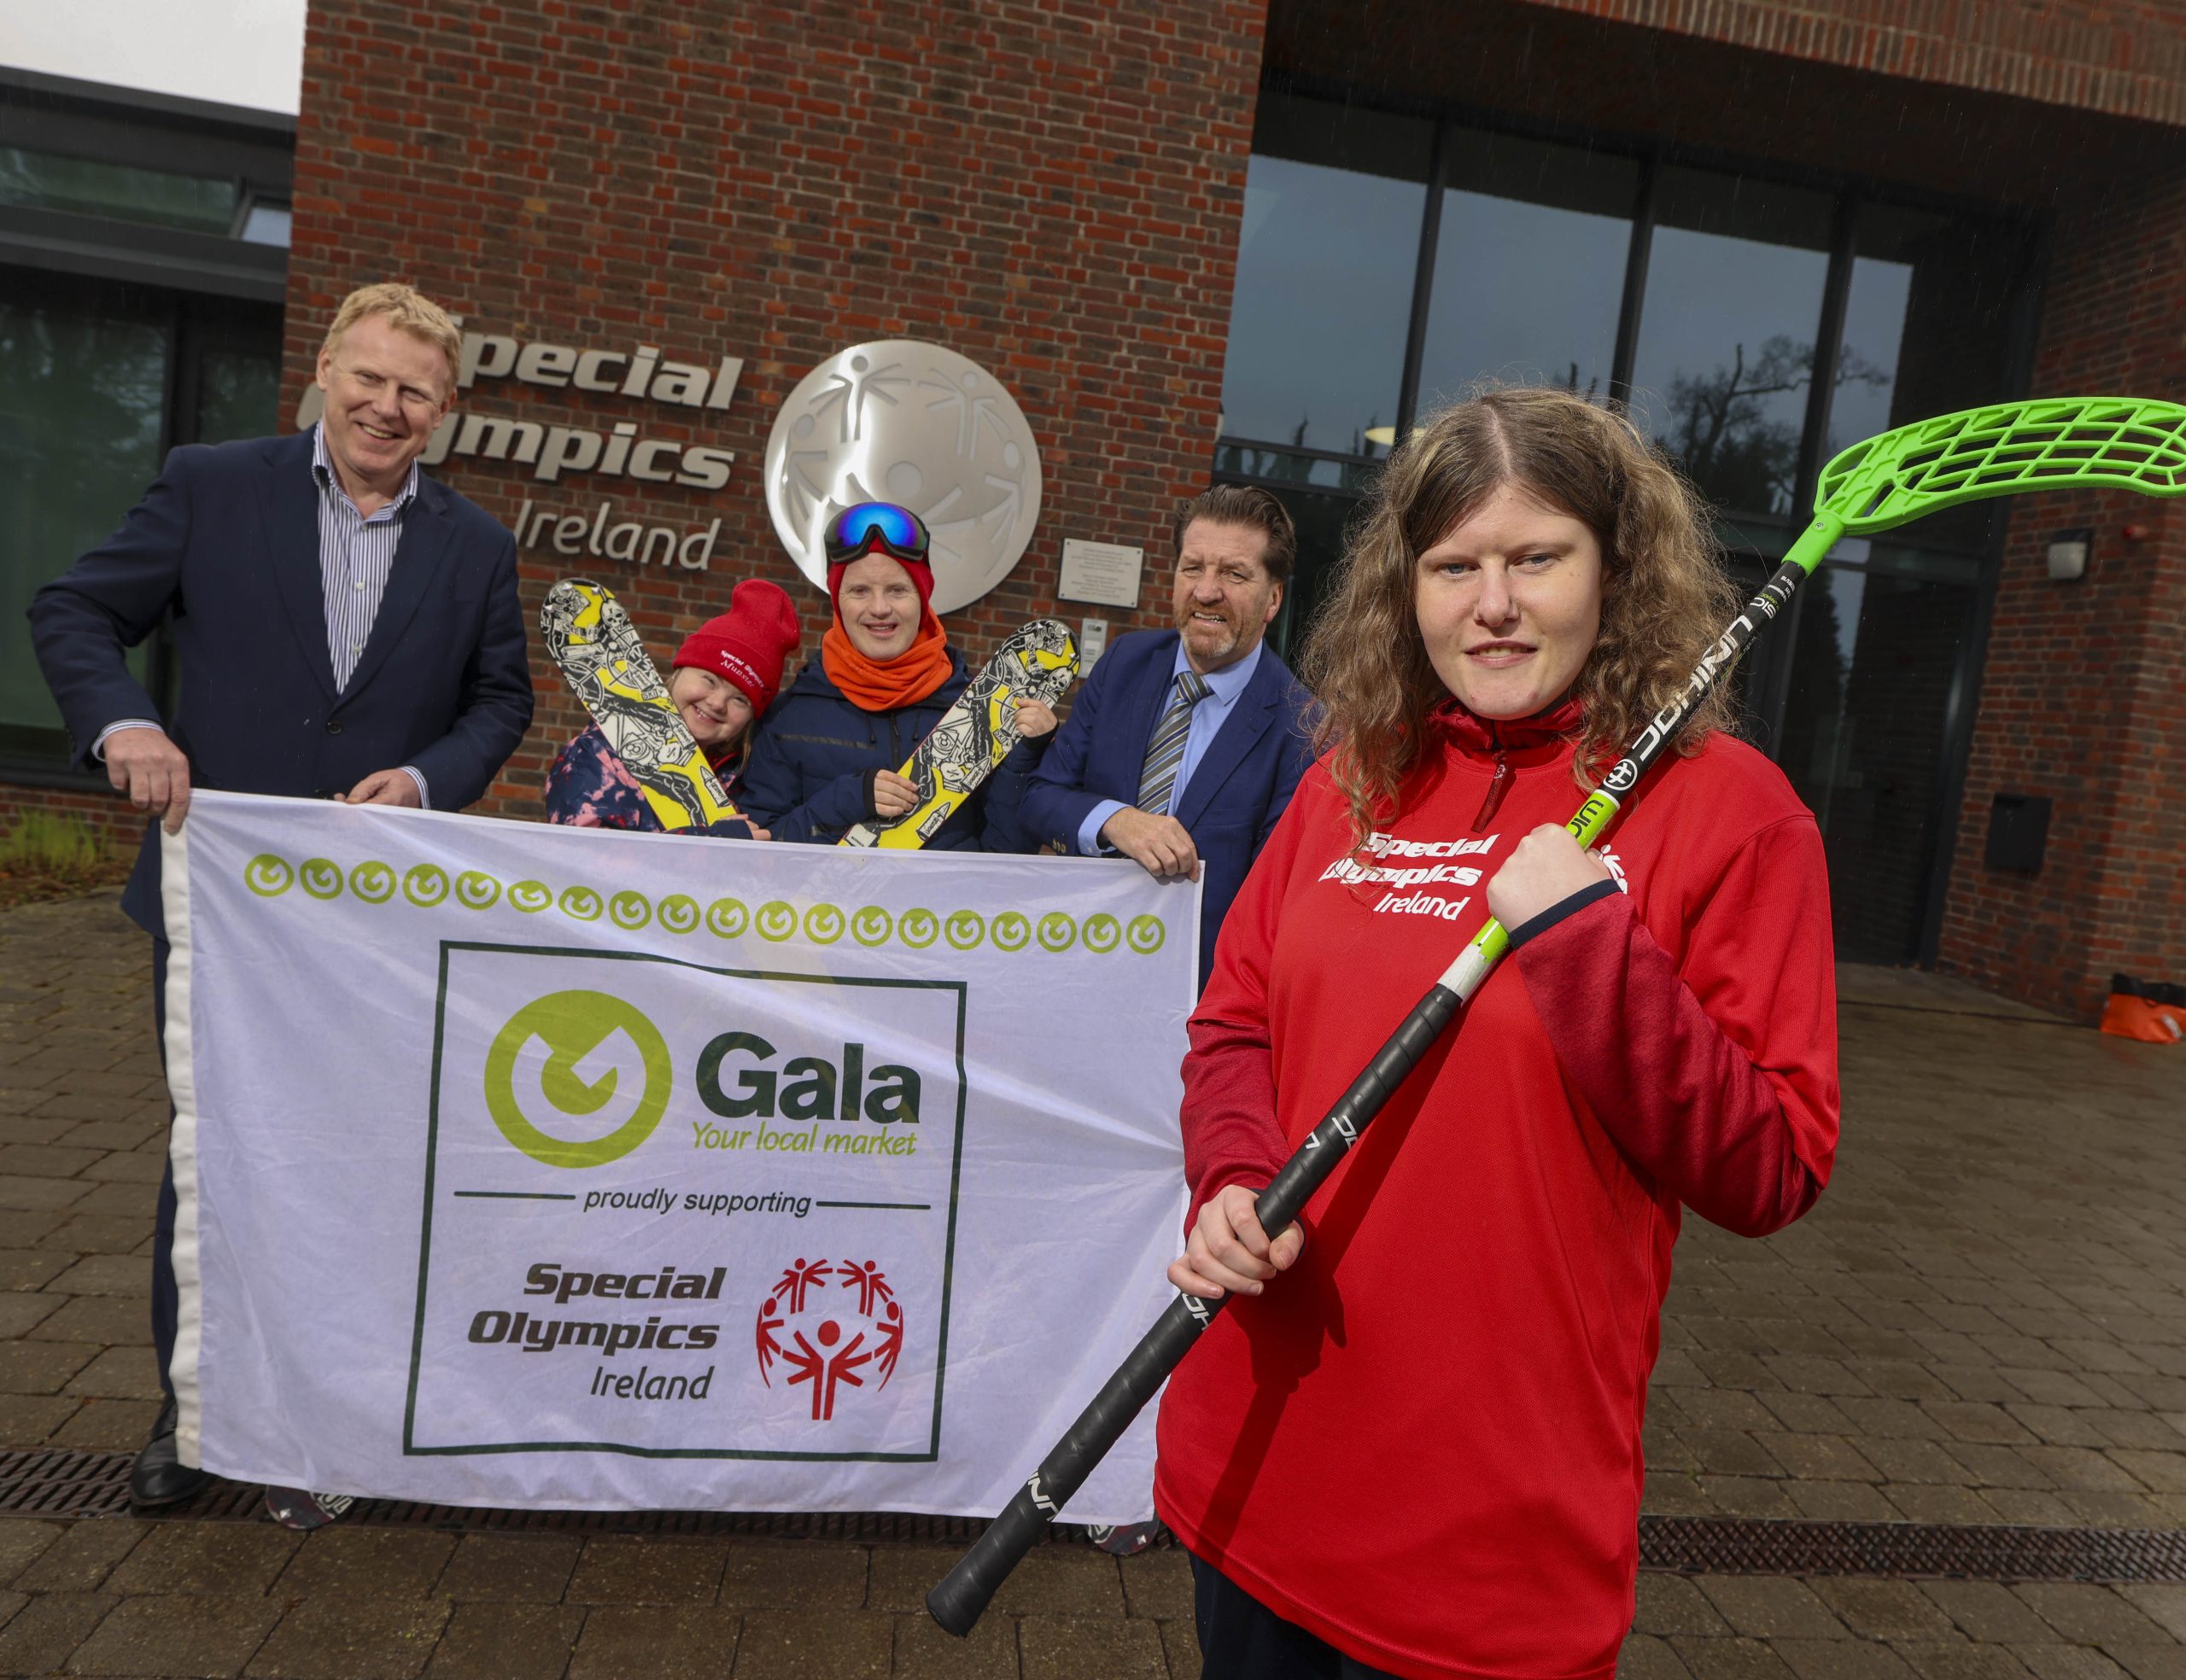 Gala Retail skis off in support of Special Olympics Ireland